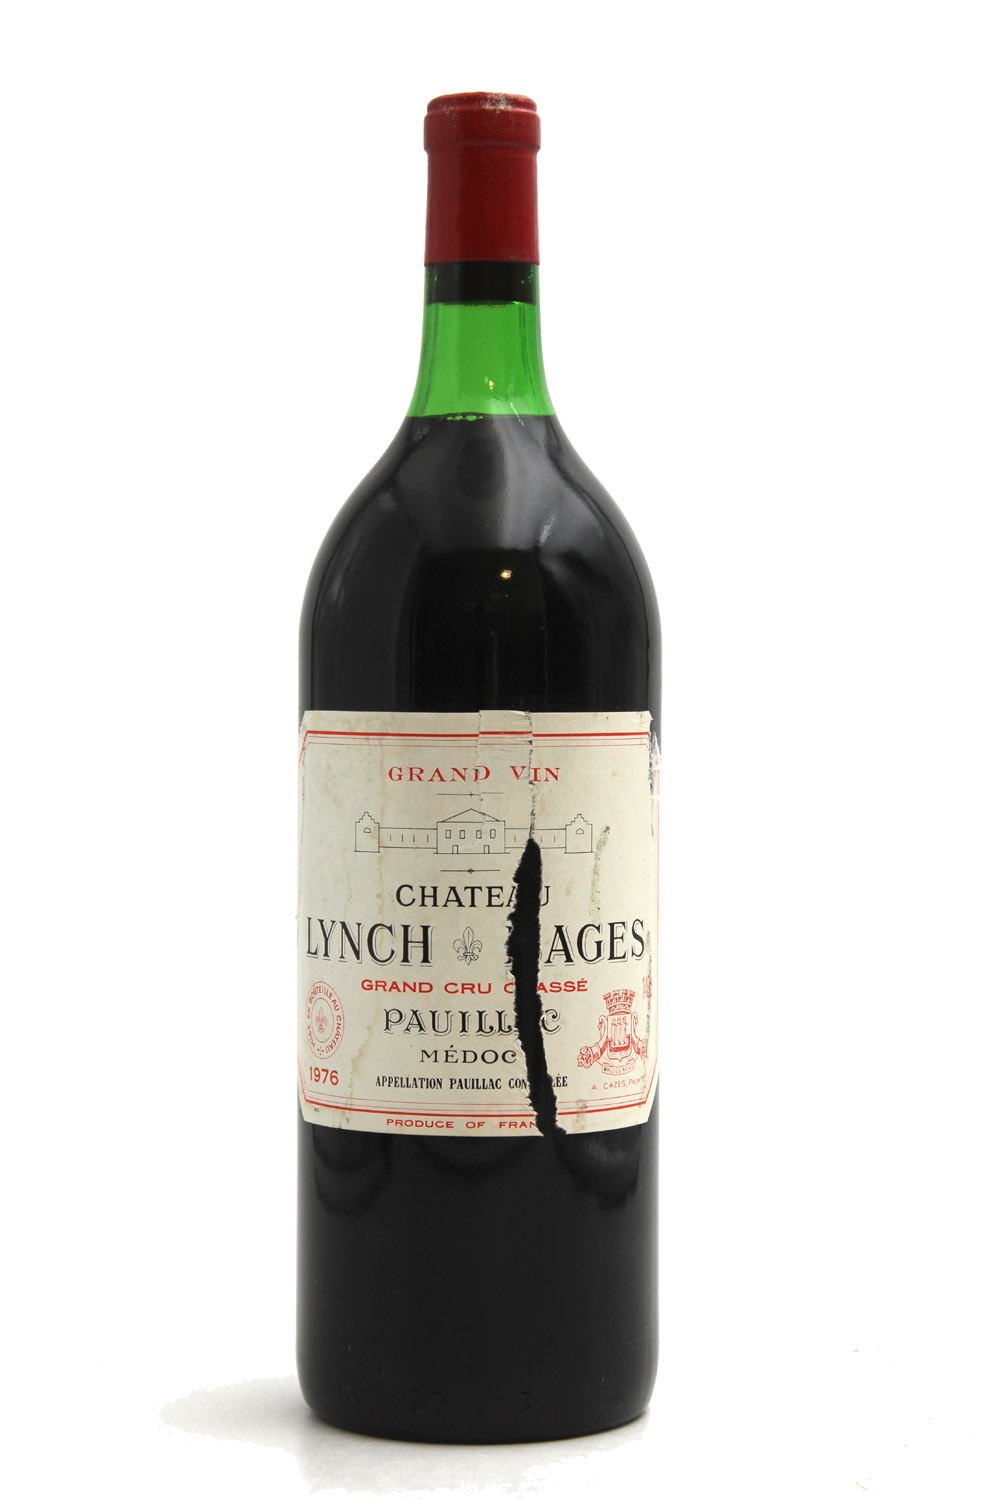 Lynch bages 76